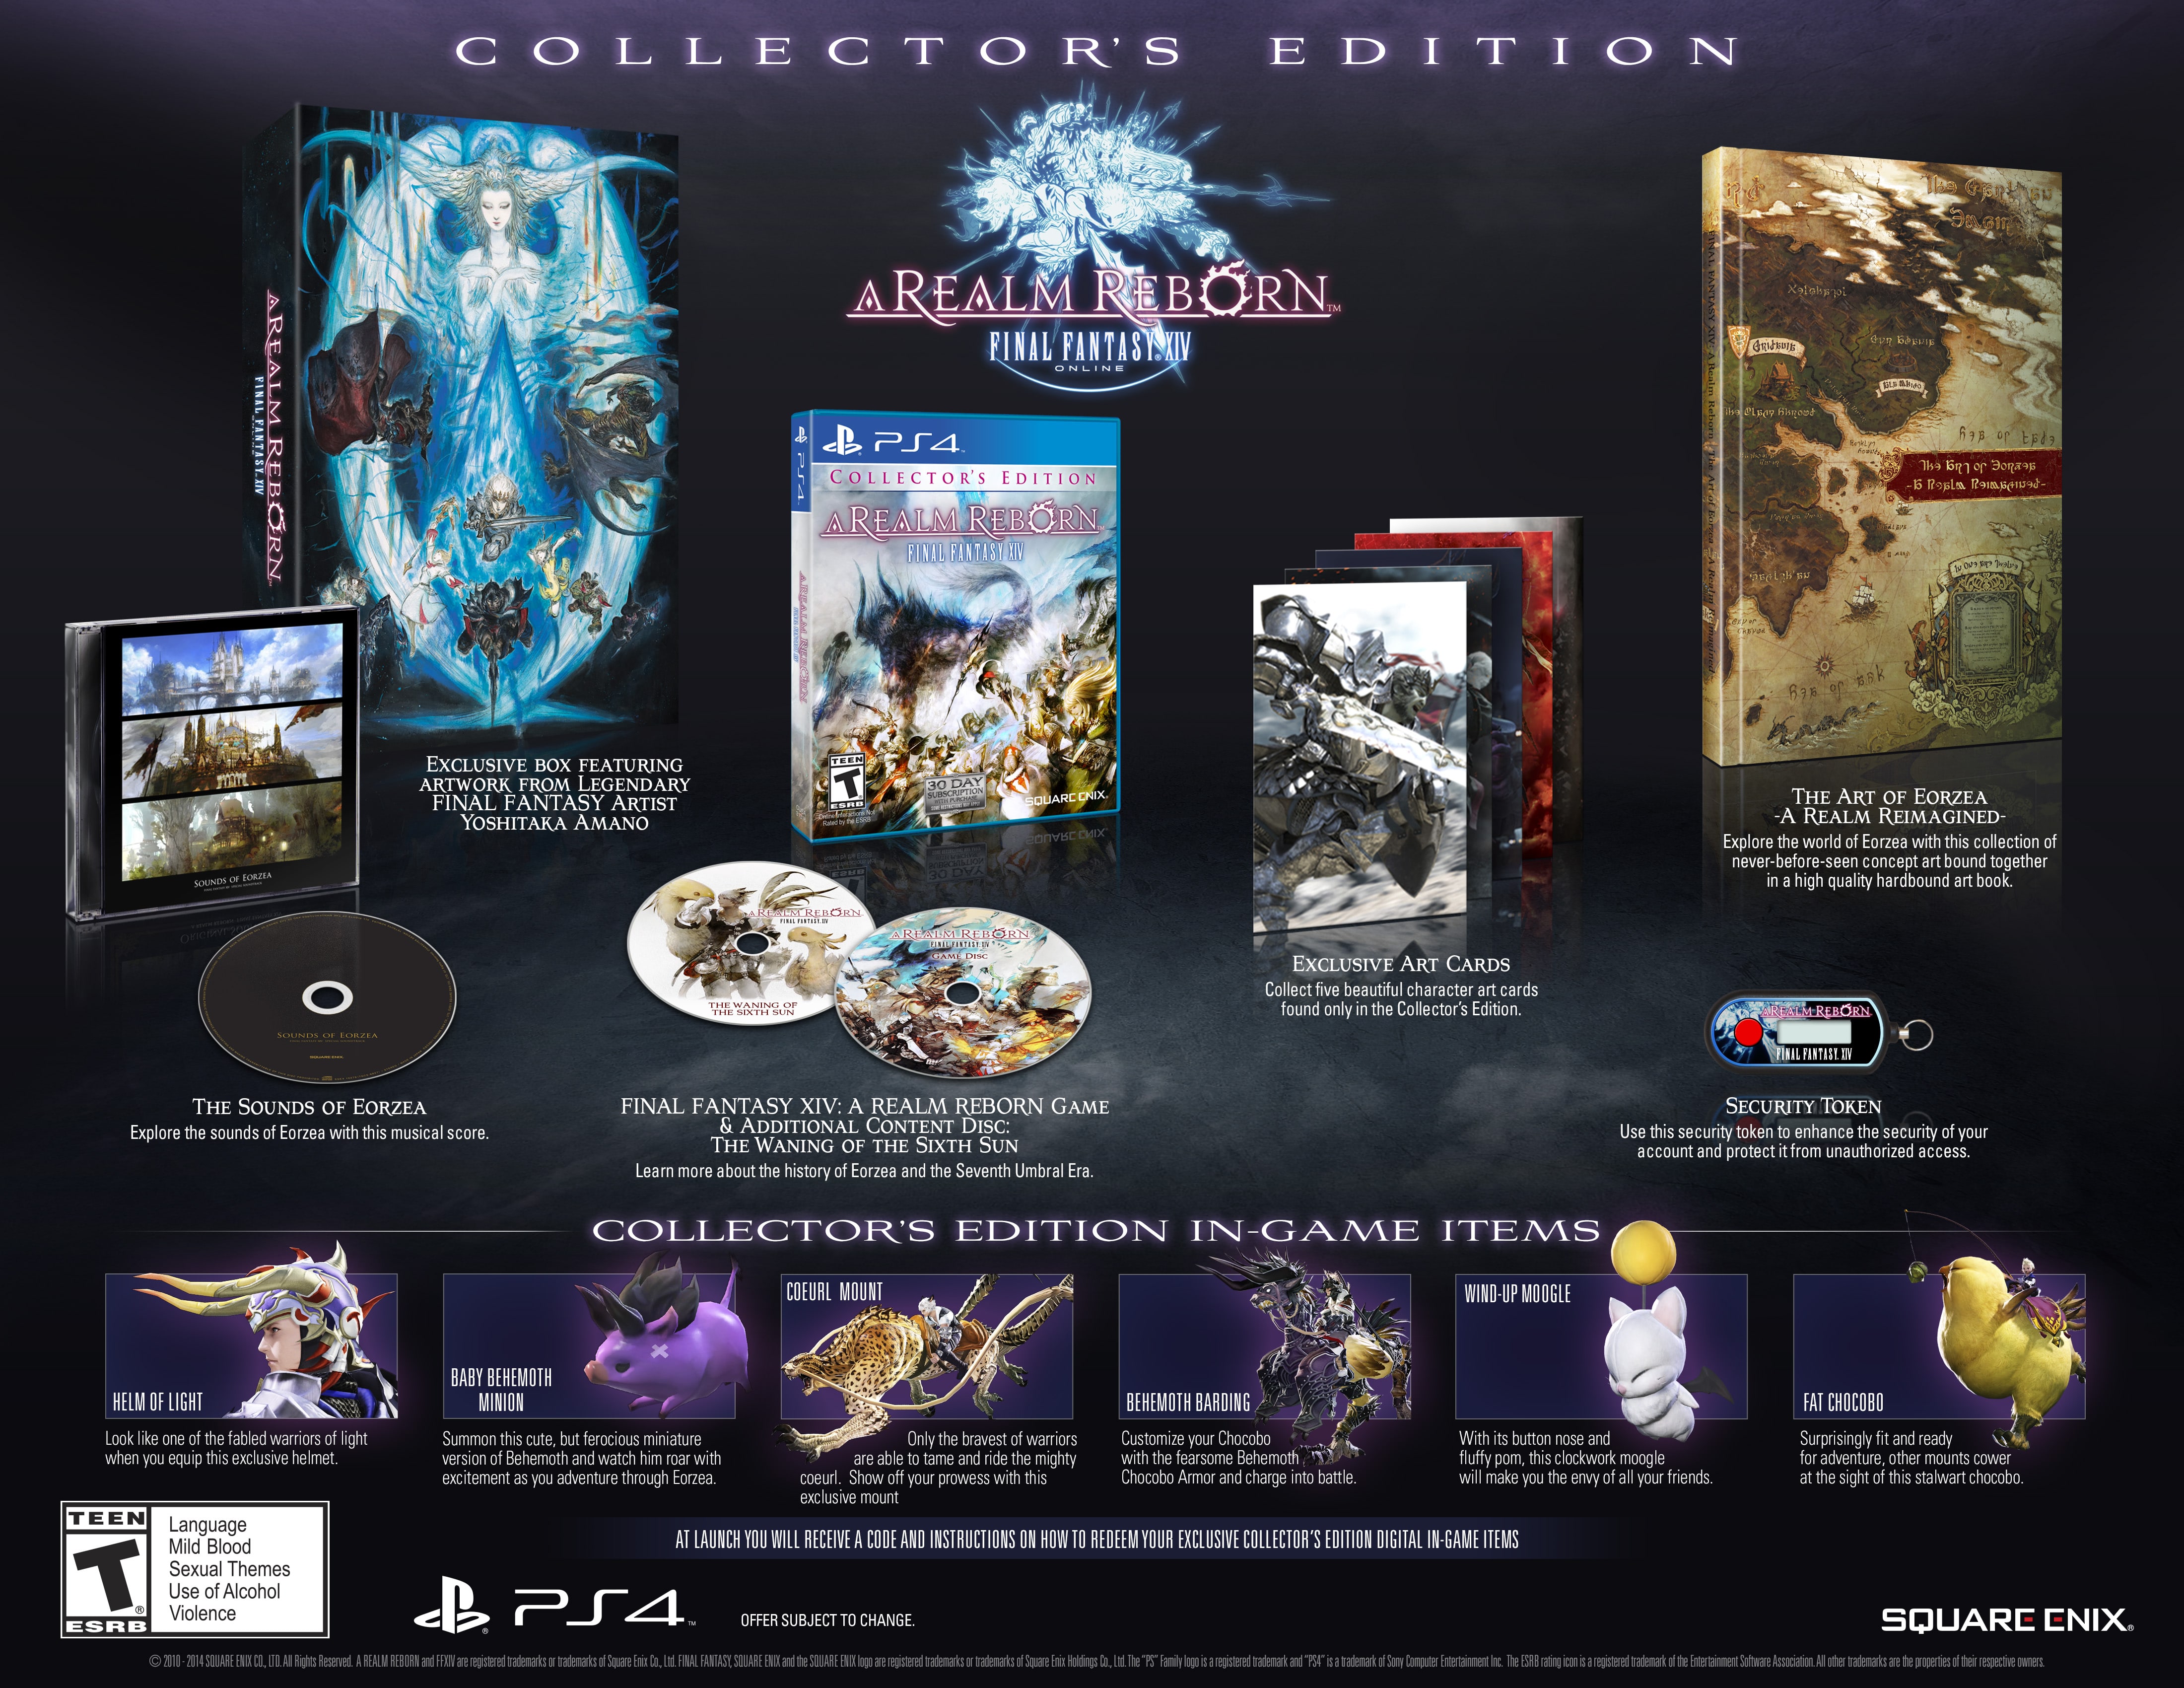 FF XIV collector's edition